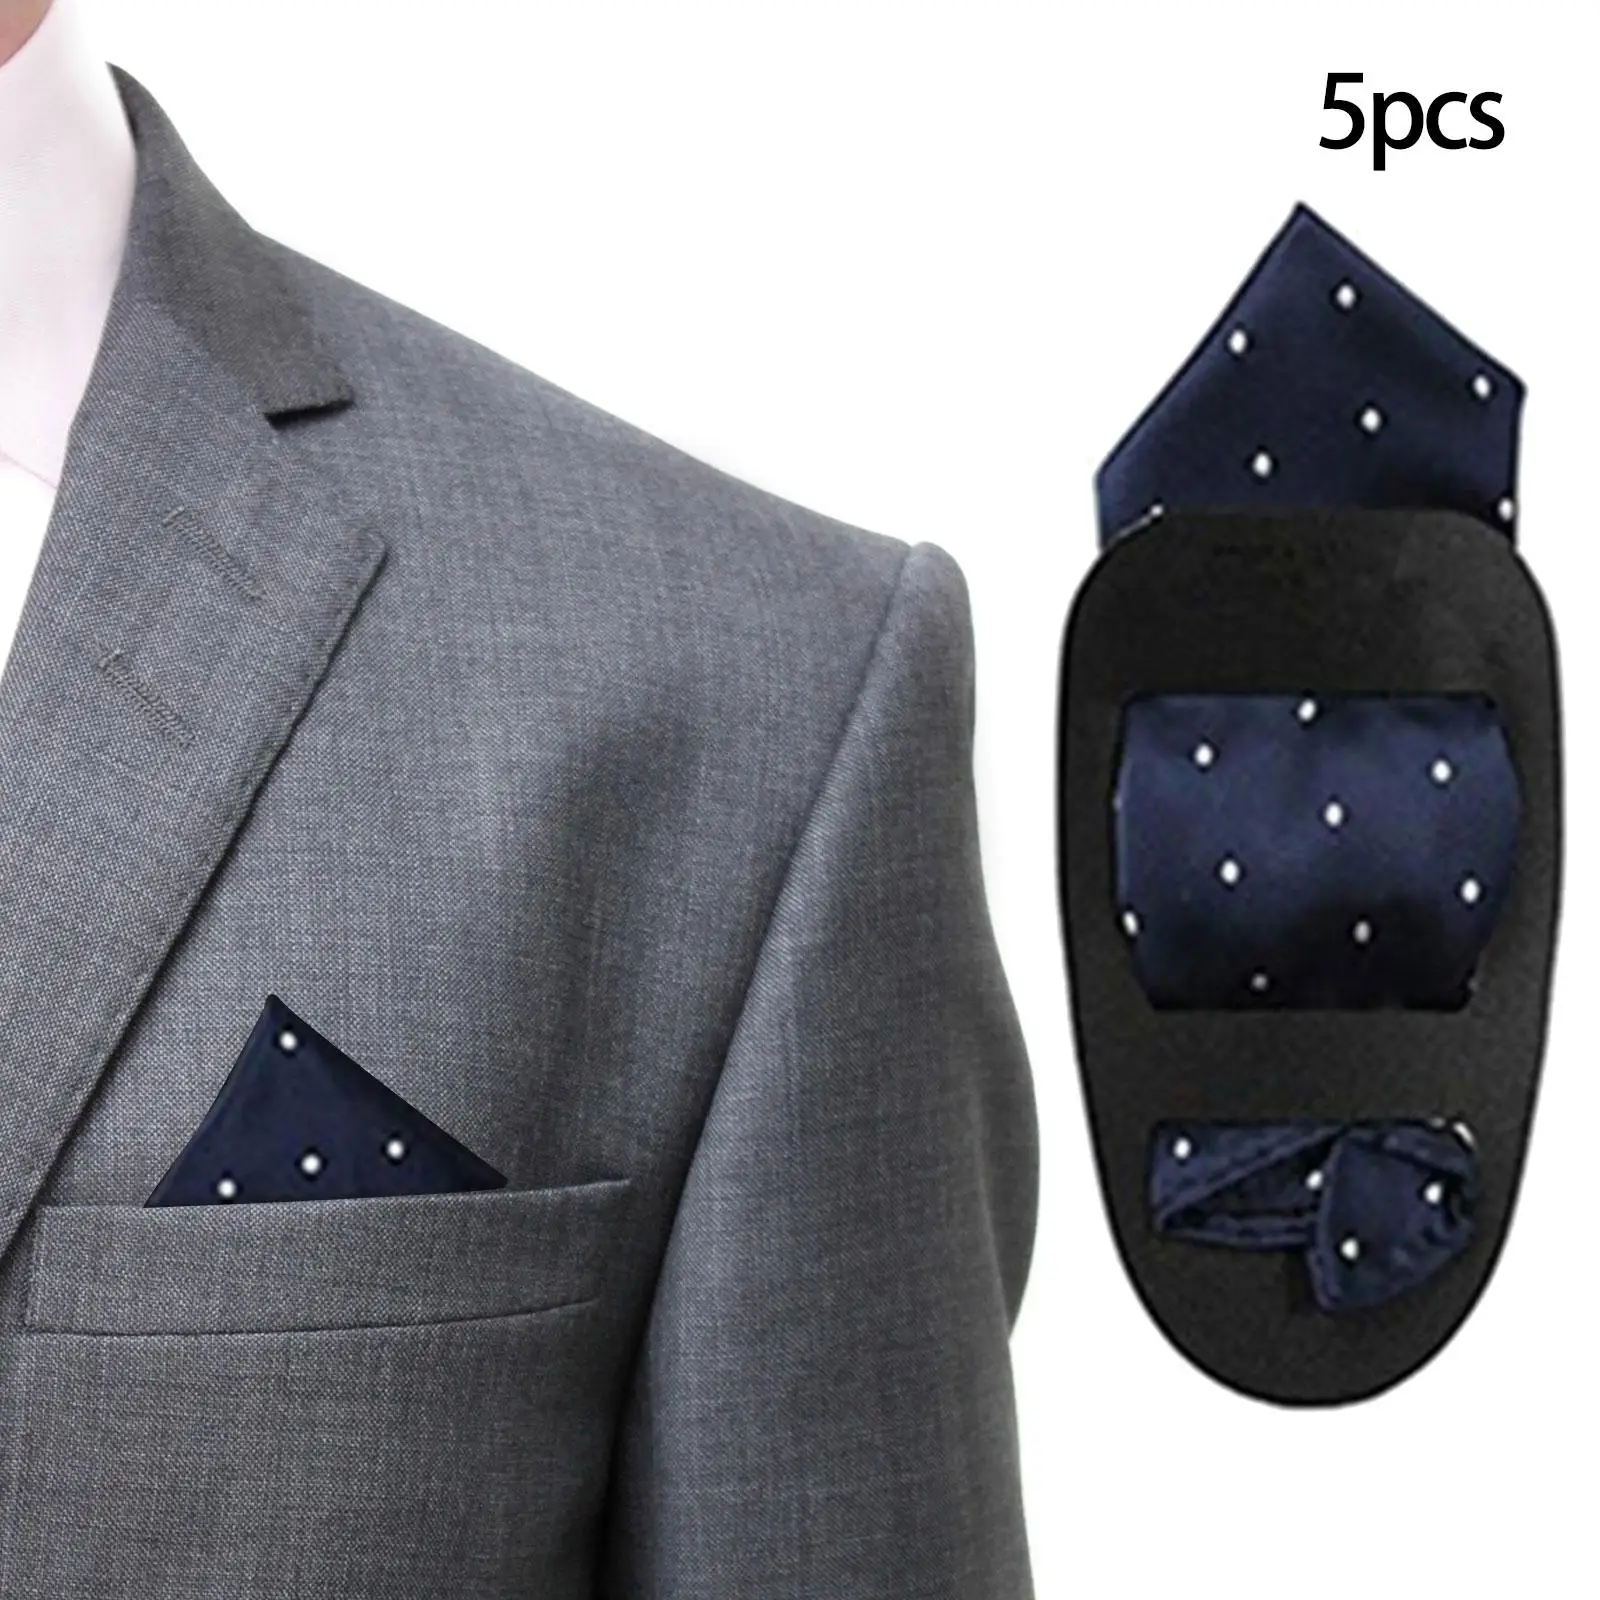 5 Pieces Pocket Square Holder Square Scarf Holder for MenS suits Jackets